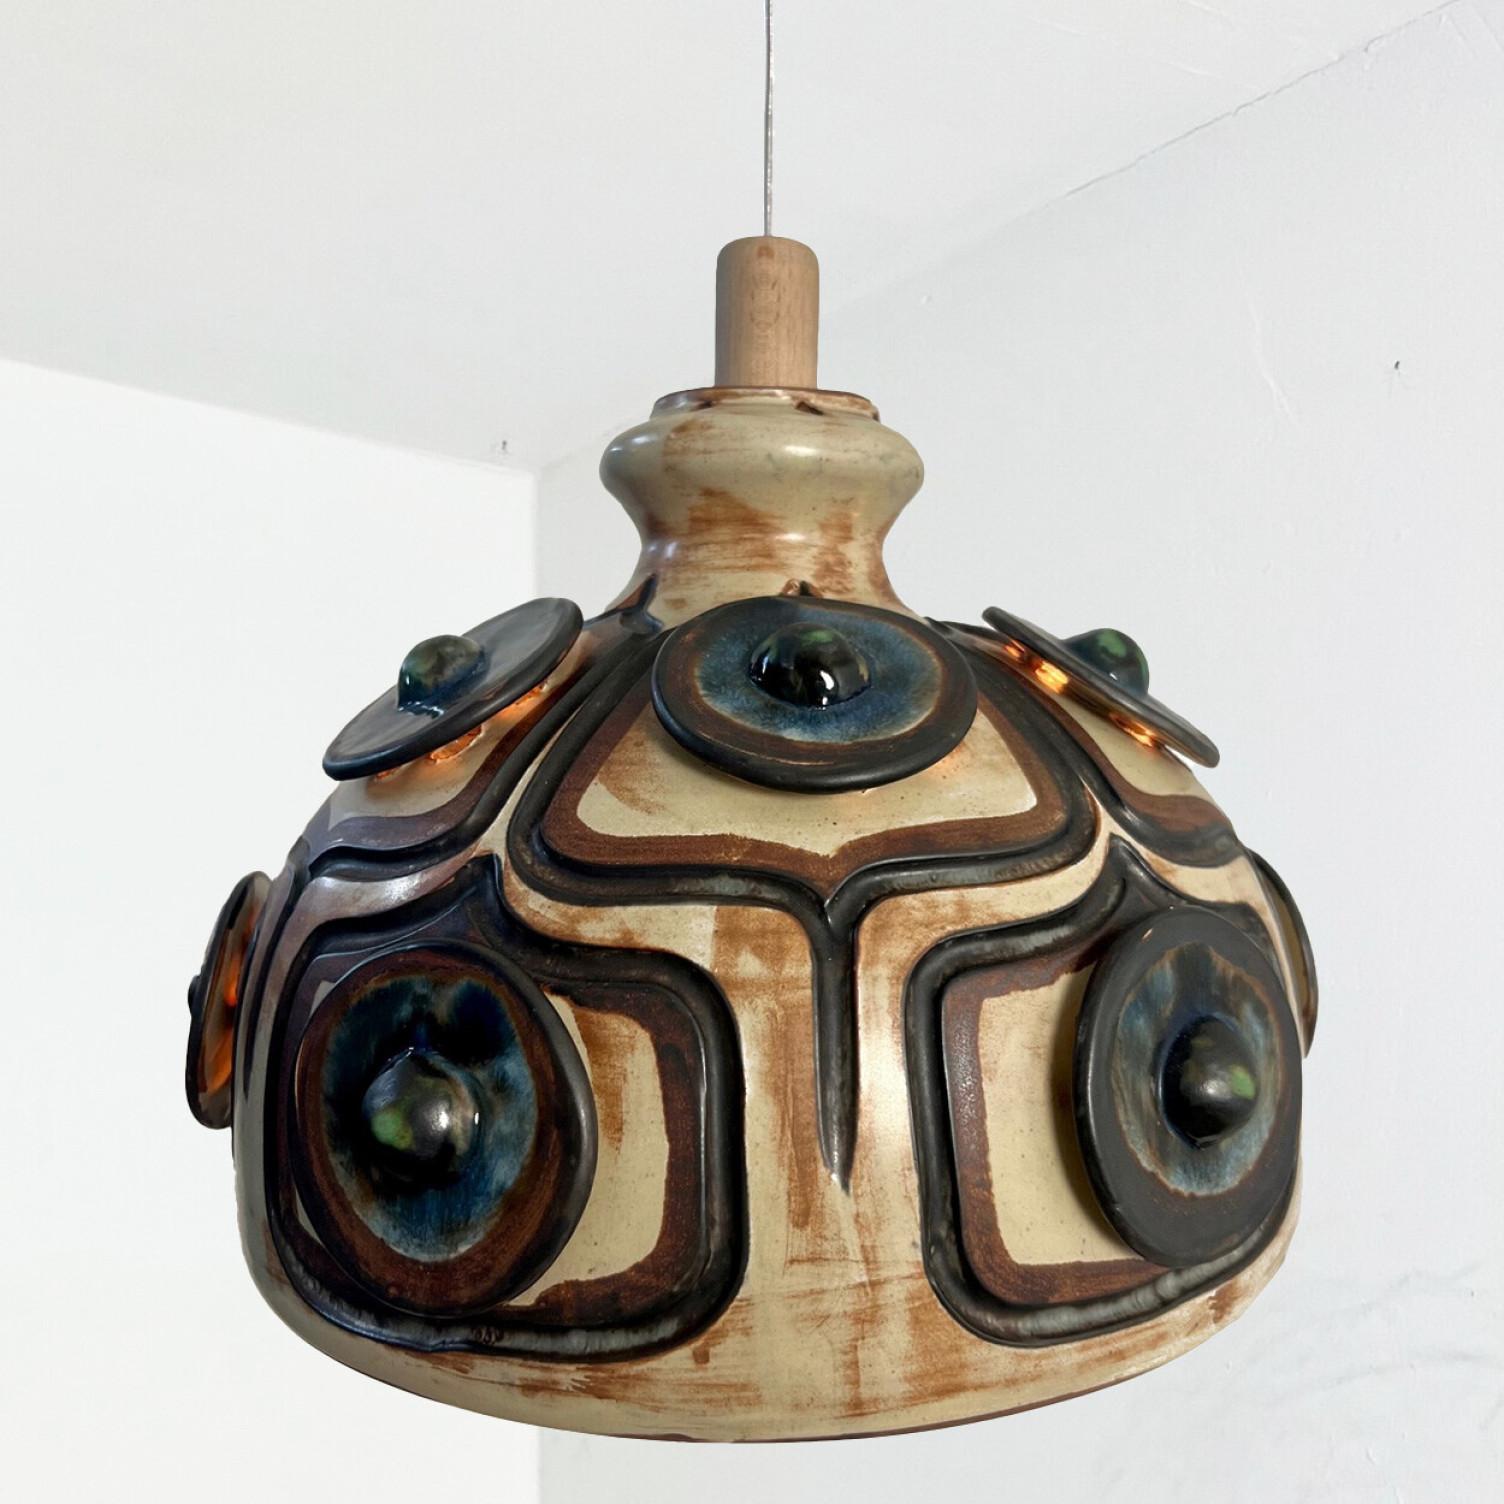 An exceptional hanging lamp with an unusual shape, made with rich colored ceramic,  manufactured in the 1970s in Denmark.

With beautiful fragile steel cable and wooden details. Hanging on a steel cable, the ceramic lamp is a real piece of art